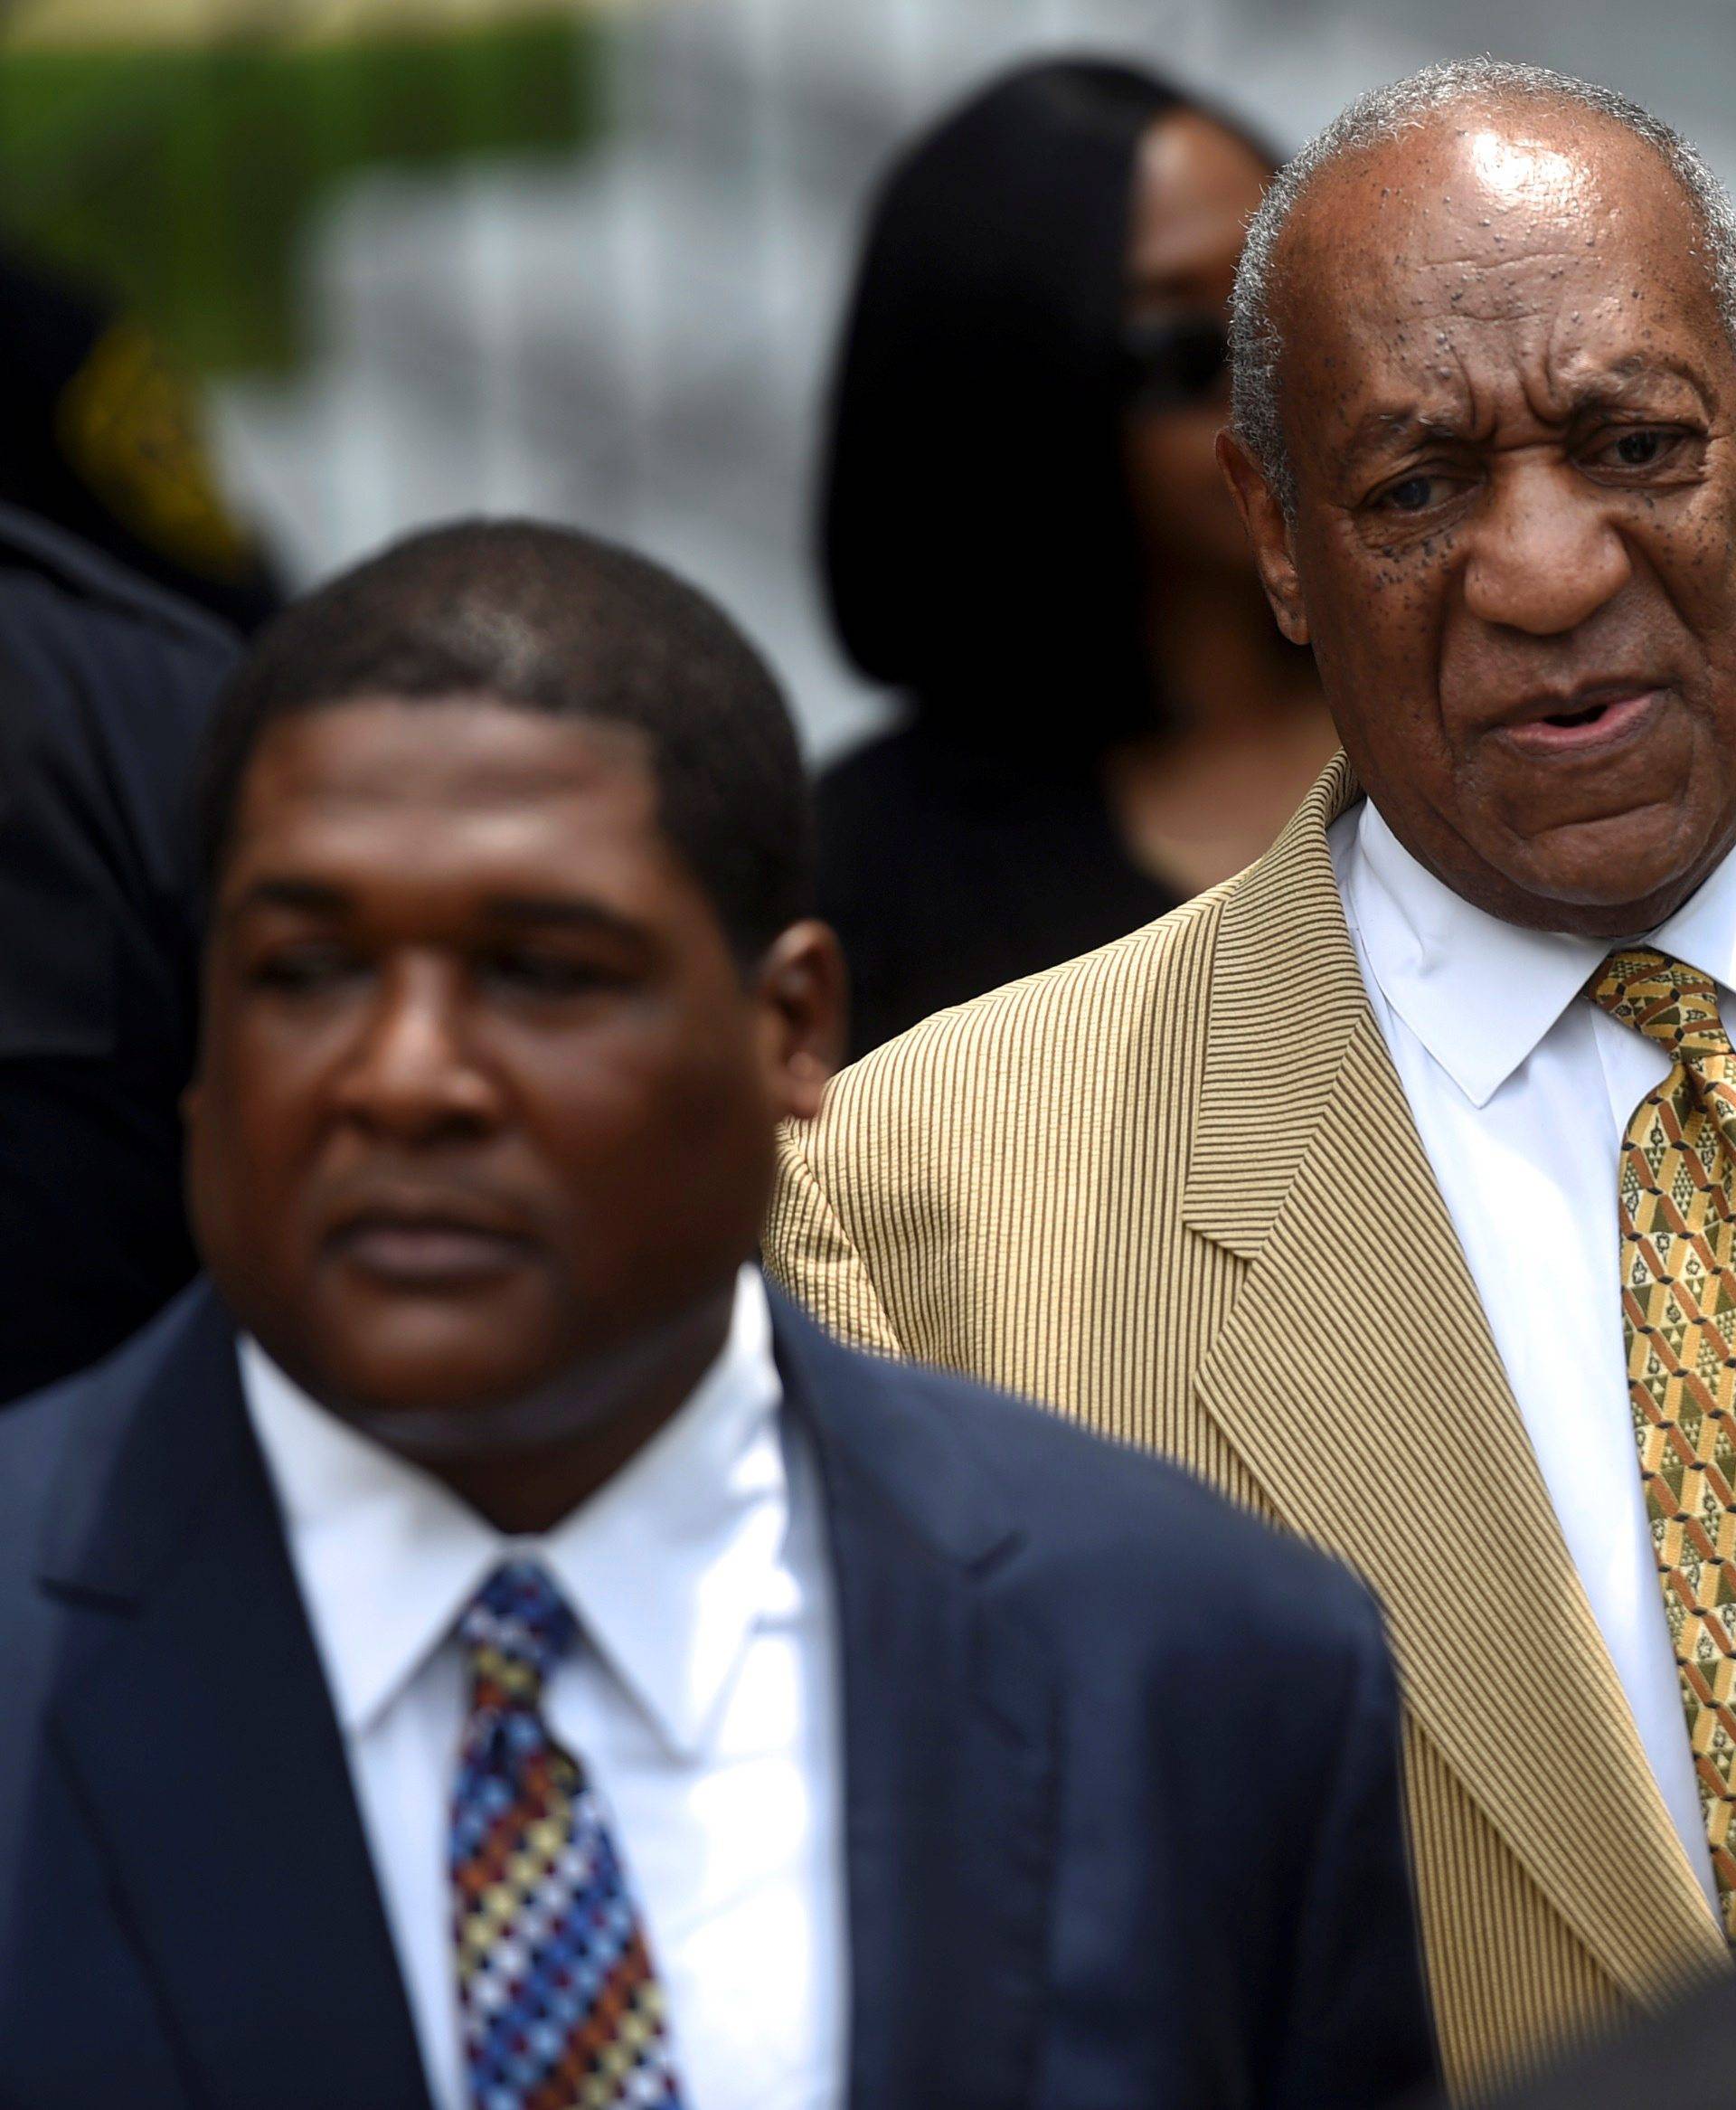 Actor and comedian Bill Cosby arrives for a hearing on sexual assault charges at the Montgomery County Courthouse in Norristown